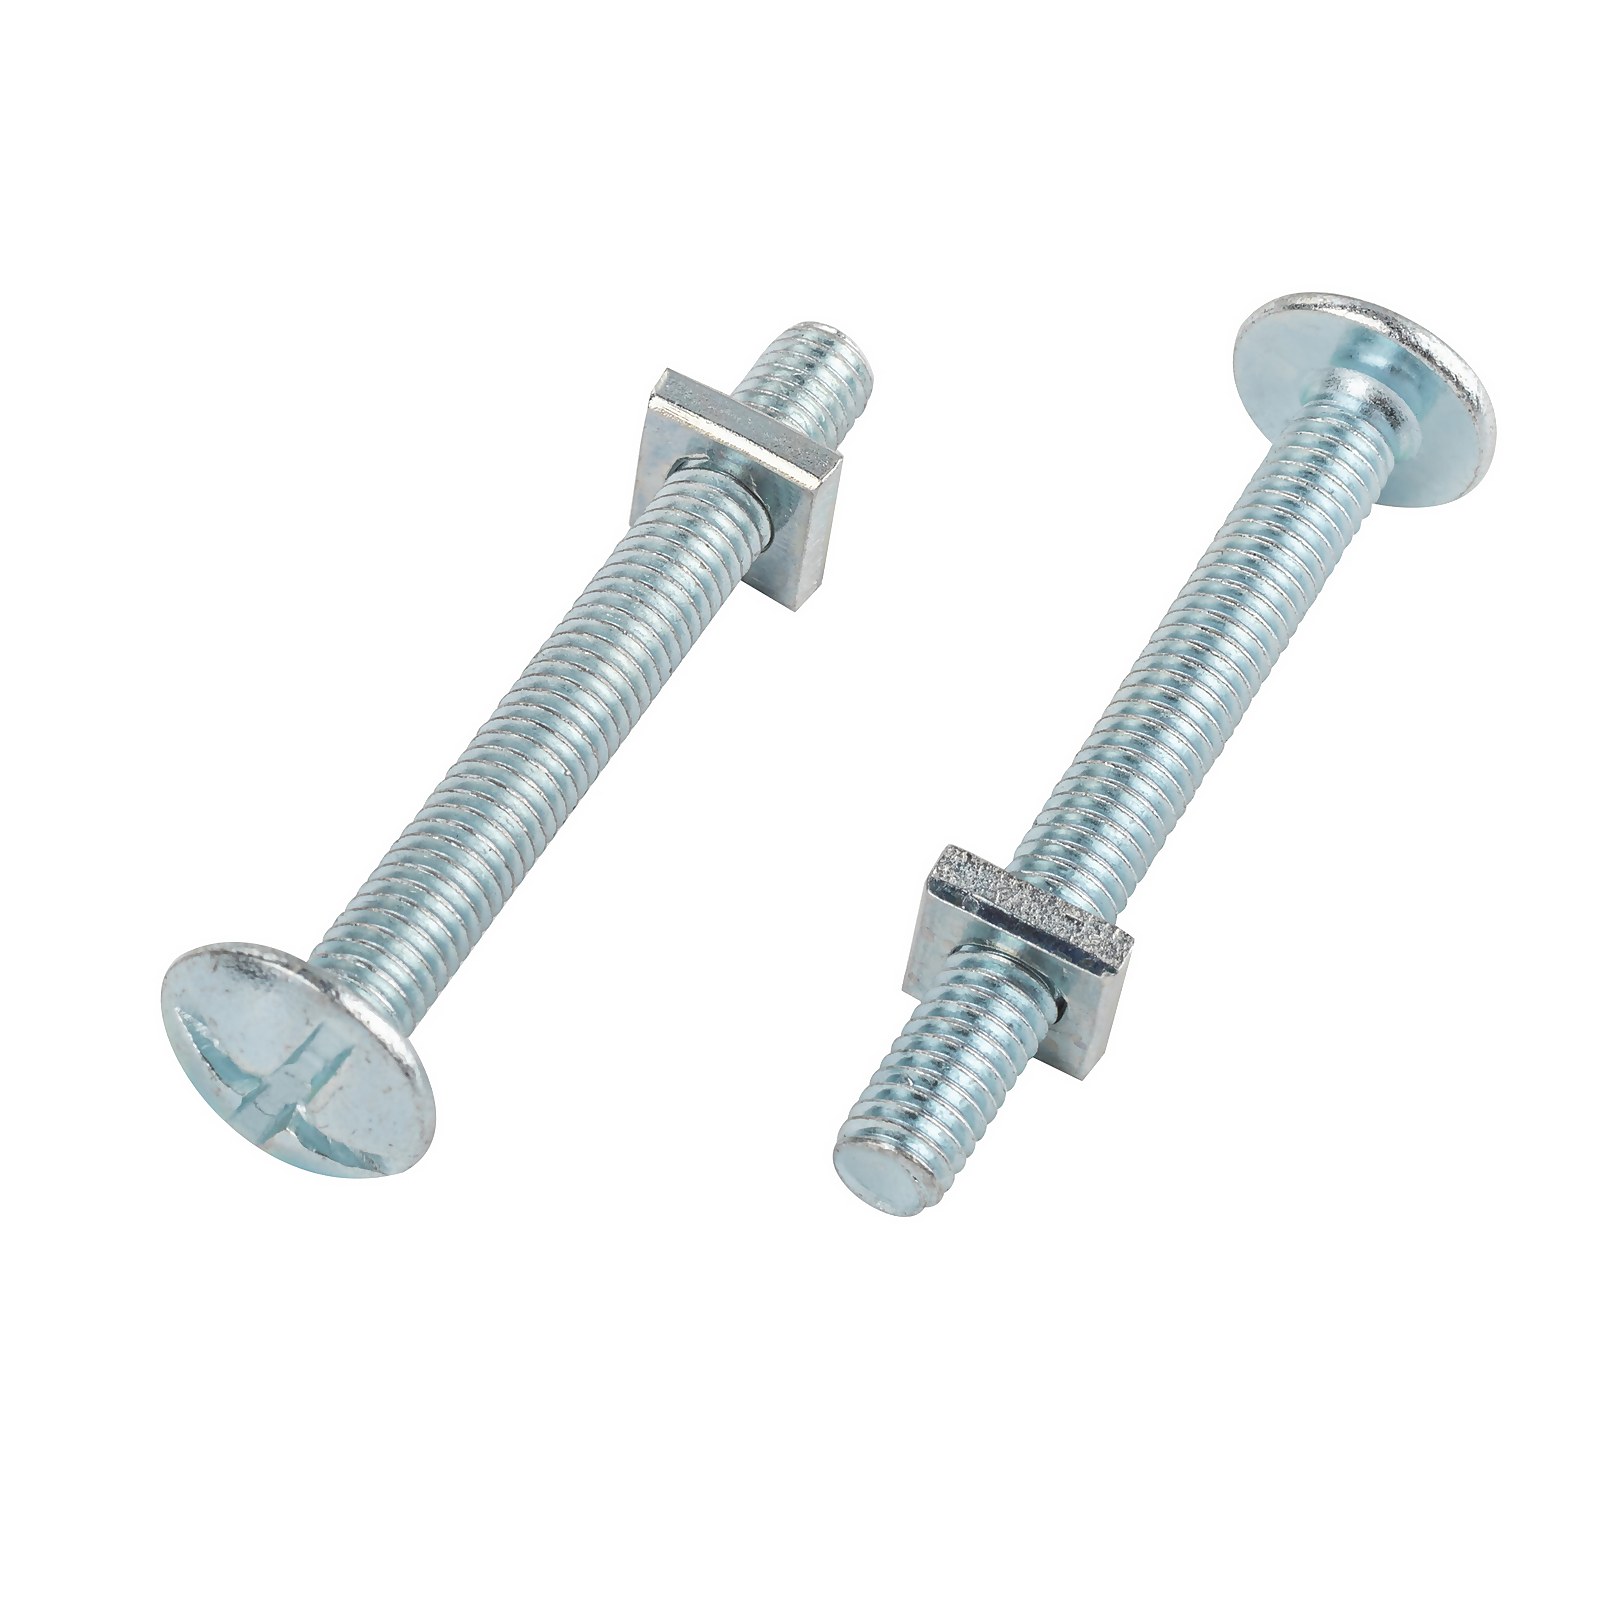 Photo of Homebase Zinc Plated Roof Bolt M6 50mm 10 Pack